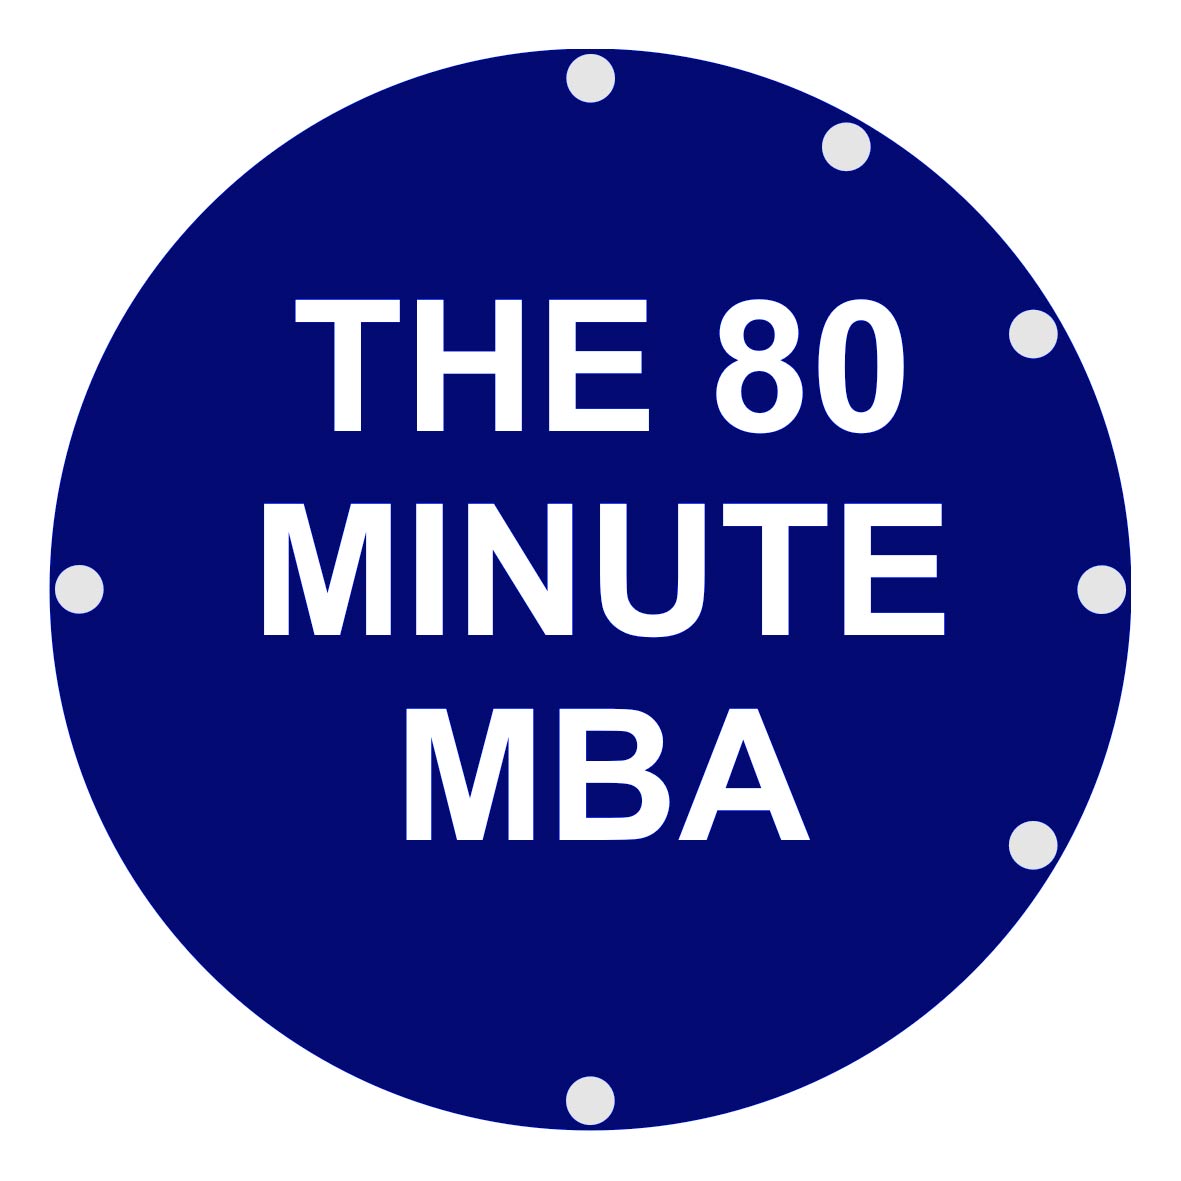 Lessons-from-80-Minute-MBA-Logo-by-Gil-Dekel